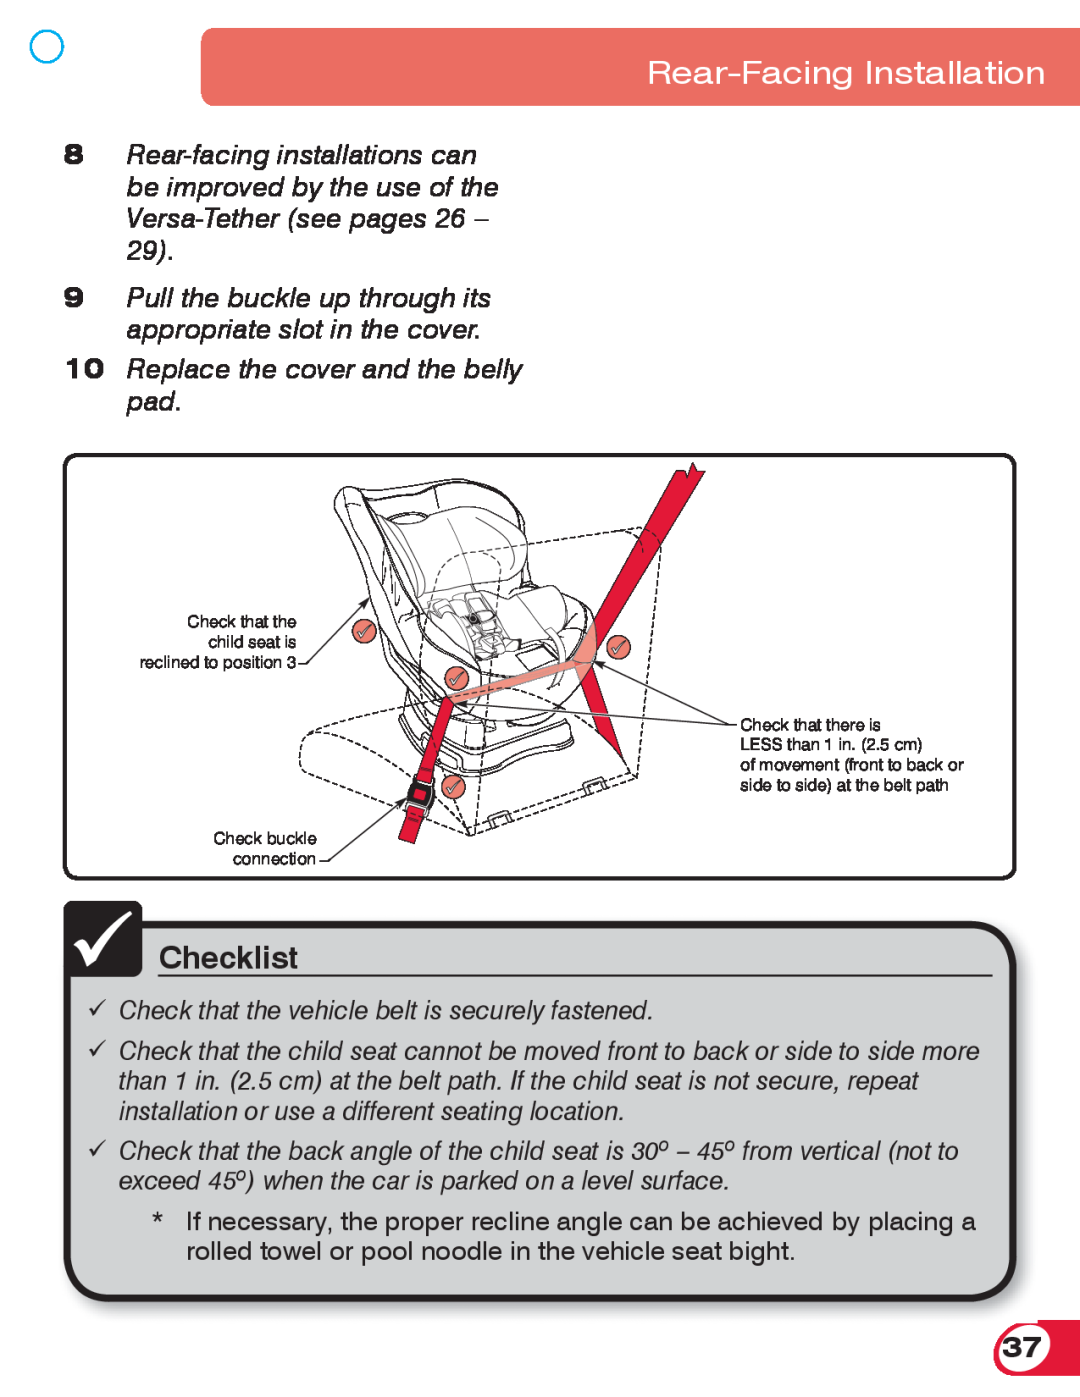 Britax 70 CS manual Rear-Facing Installation, Checklist, Replace the cover and the belly pad, LESS than 1 in. 2.5 cm 